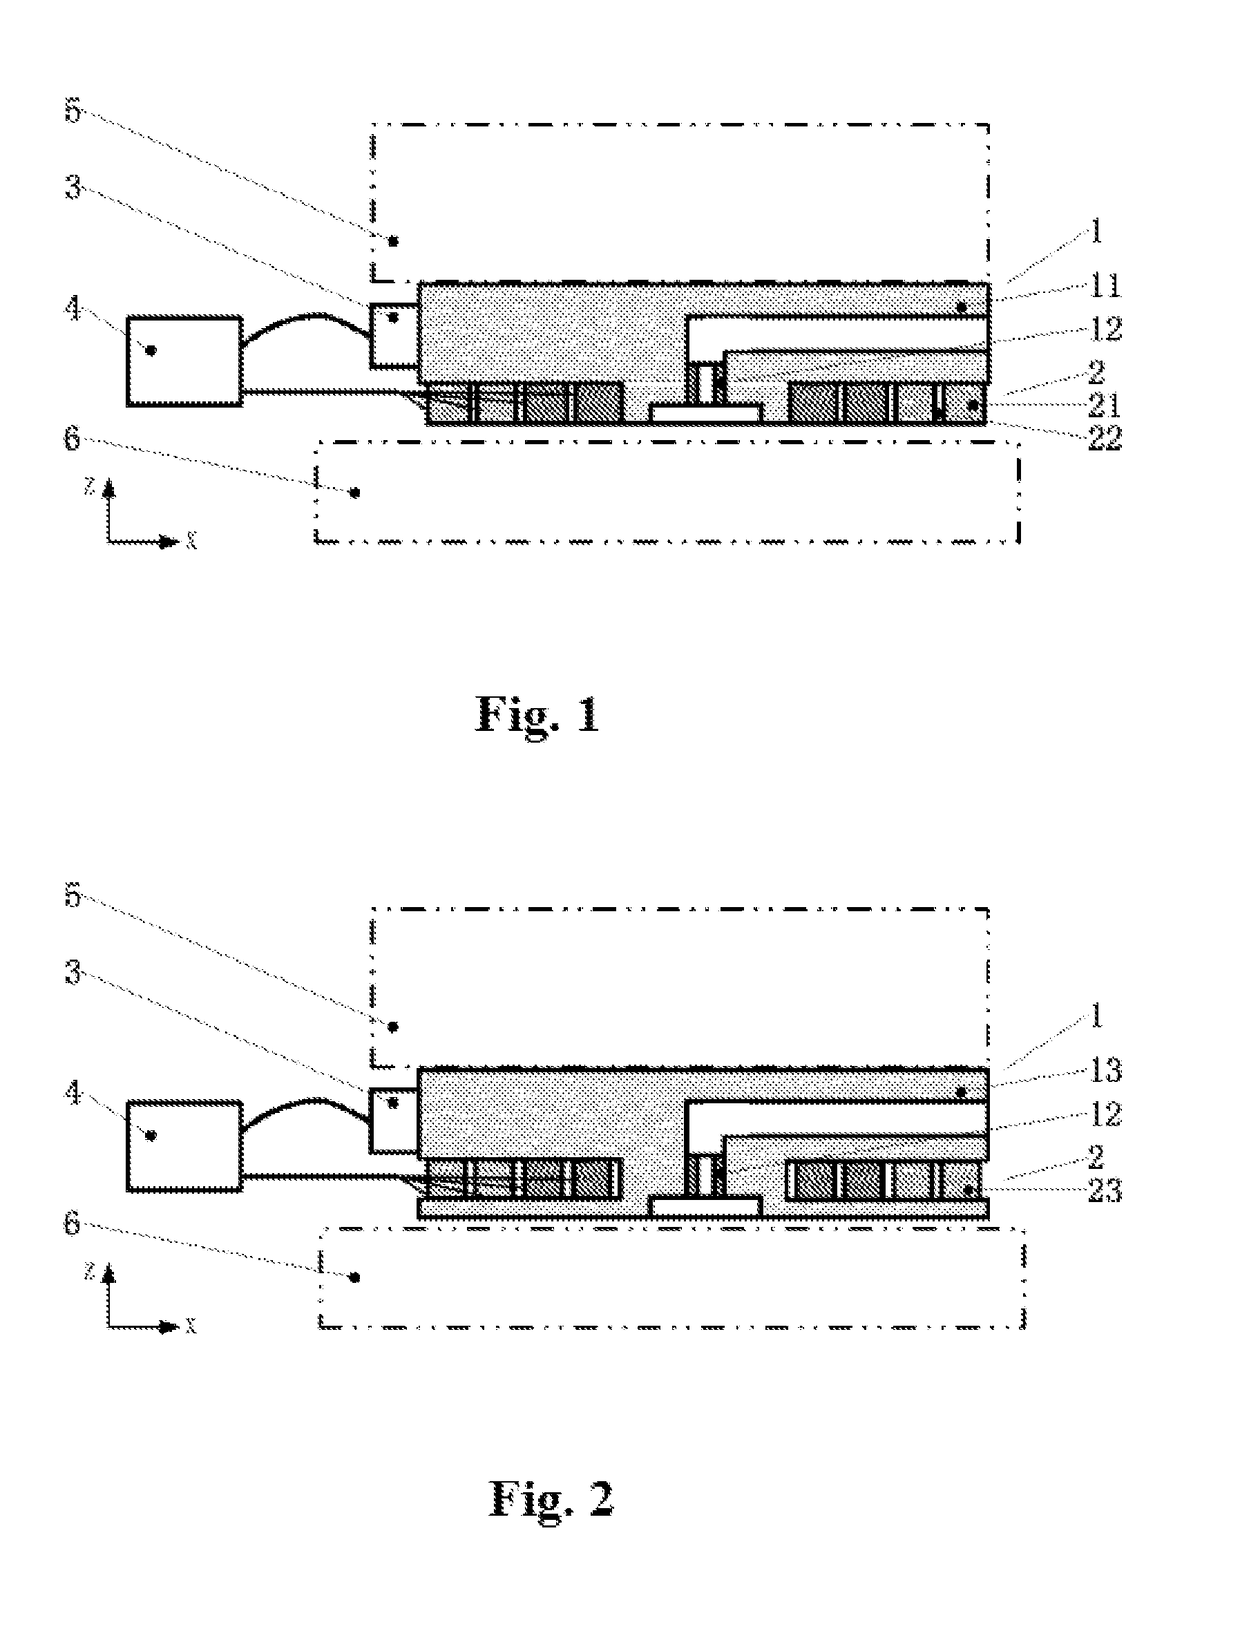 Active airbearing device